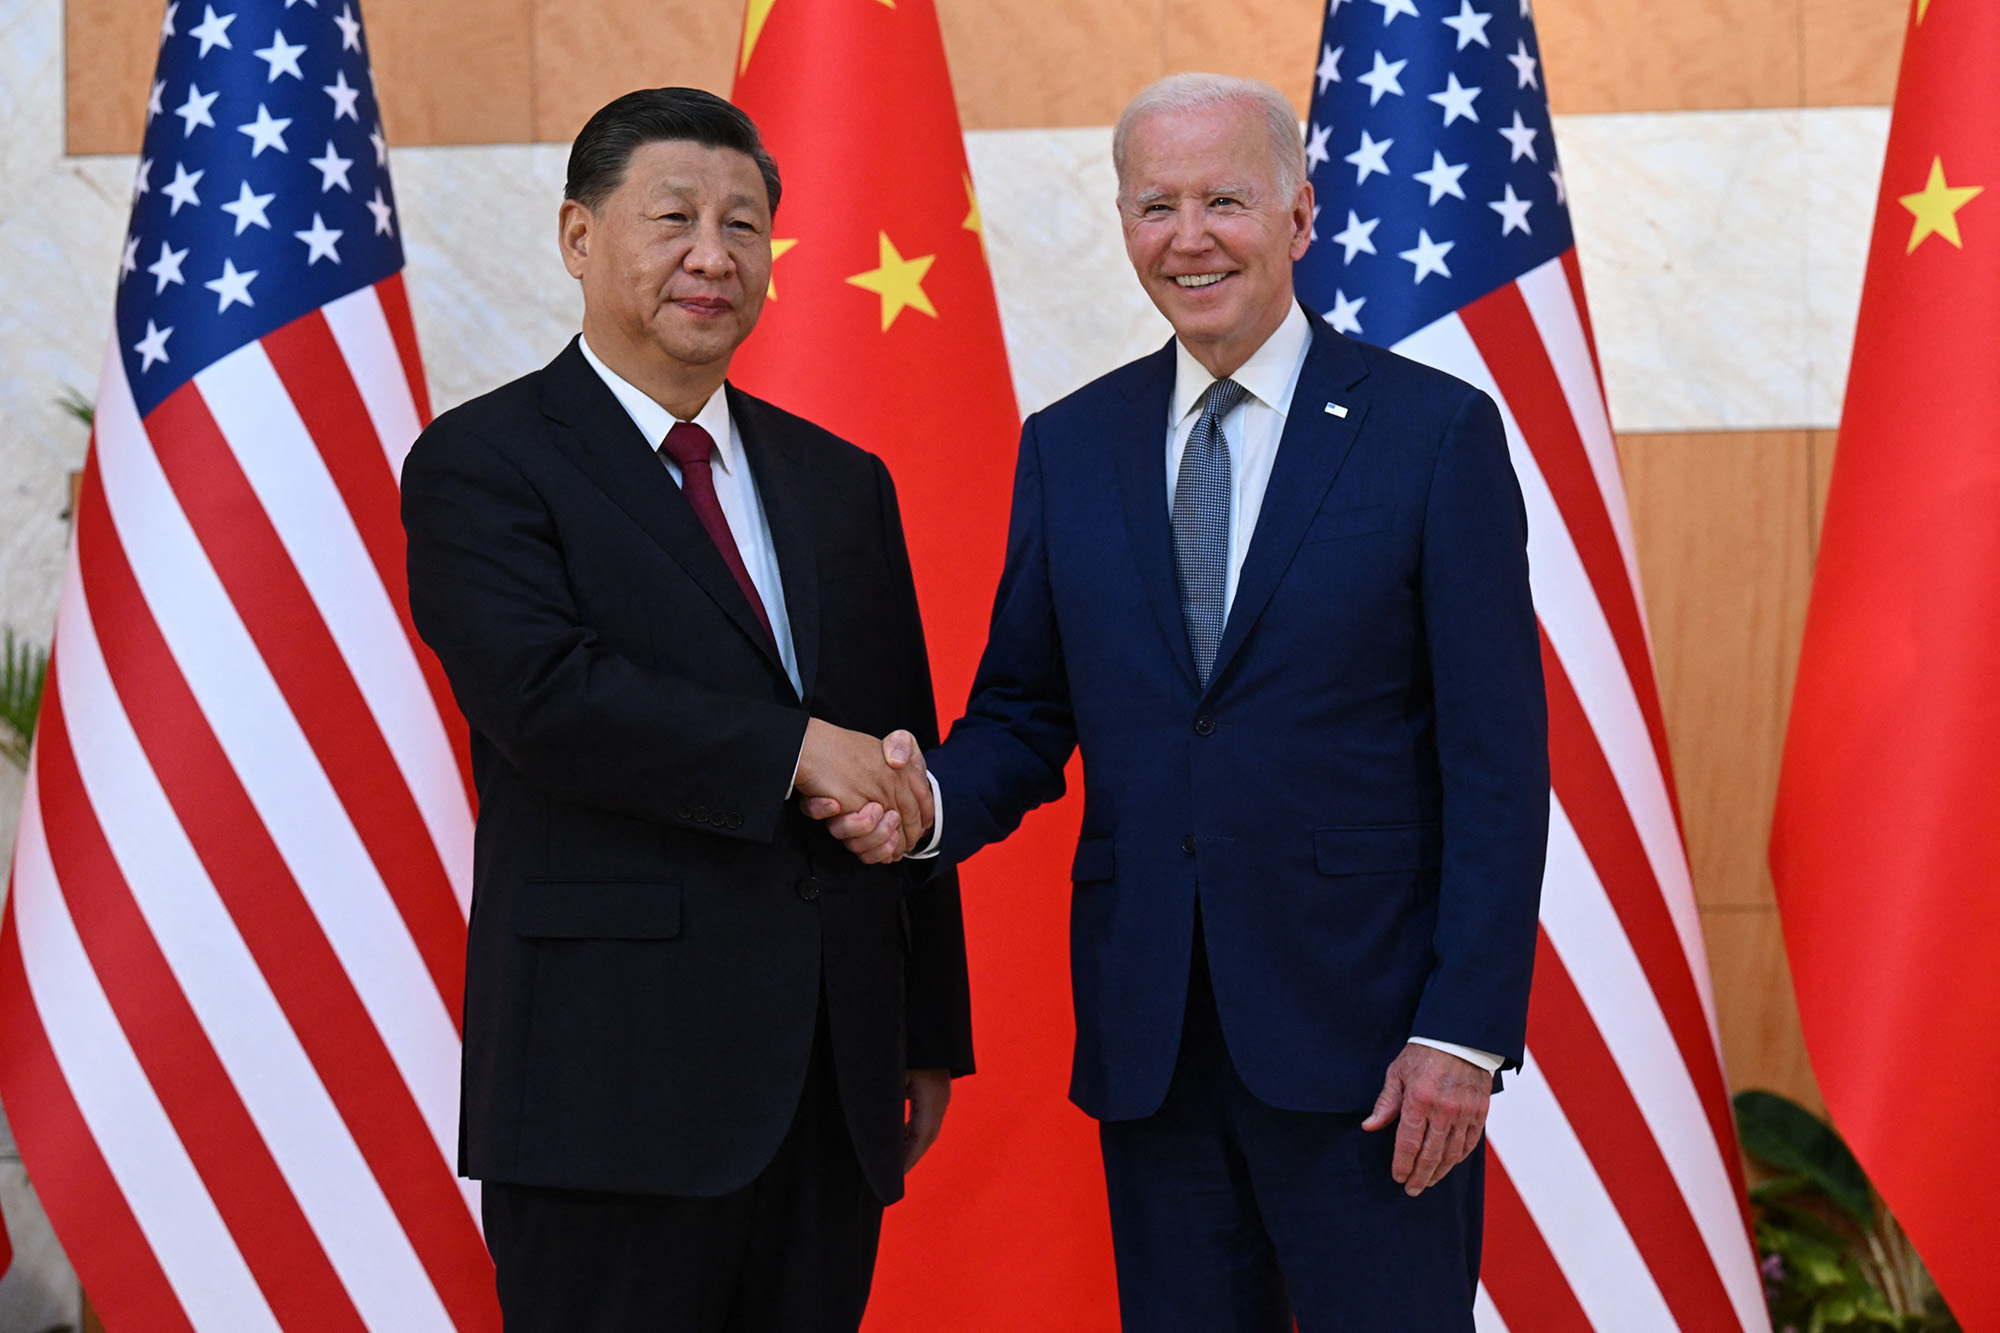 US President Joe Biden, right, and China's President Xi Jinping shake hands as they meet on the sidelines of the G20 Summit in Nusa Dua on the Indonesian resort island of Bali on November 14.